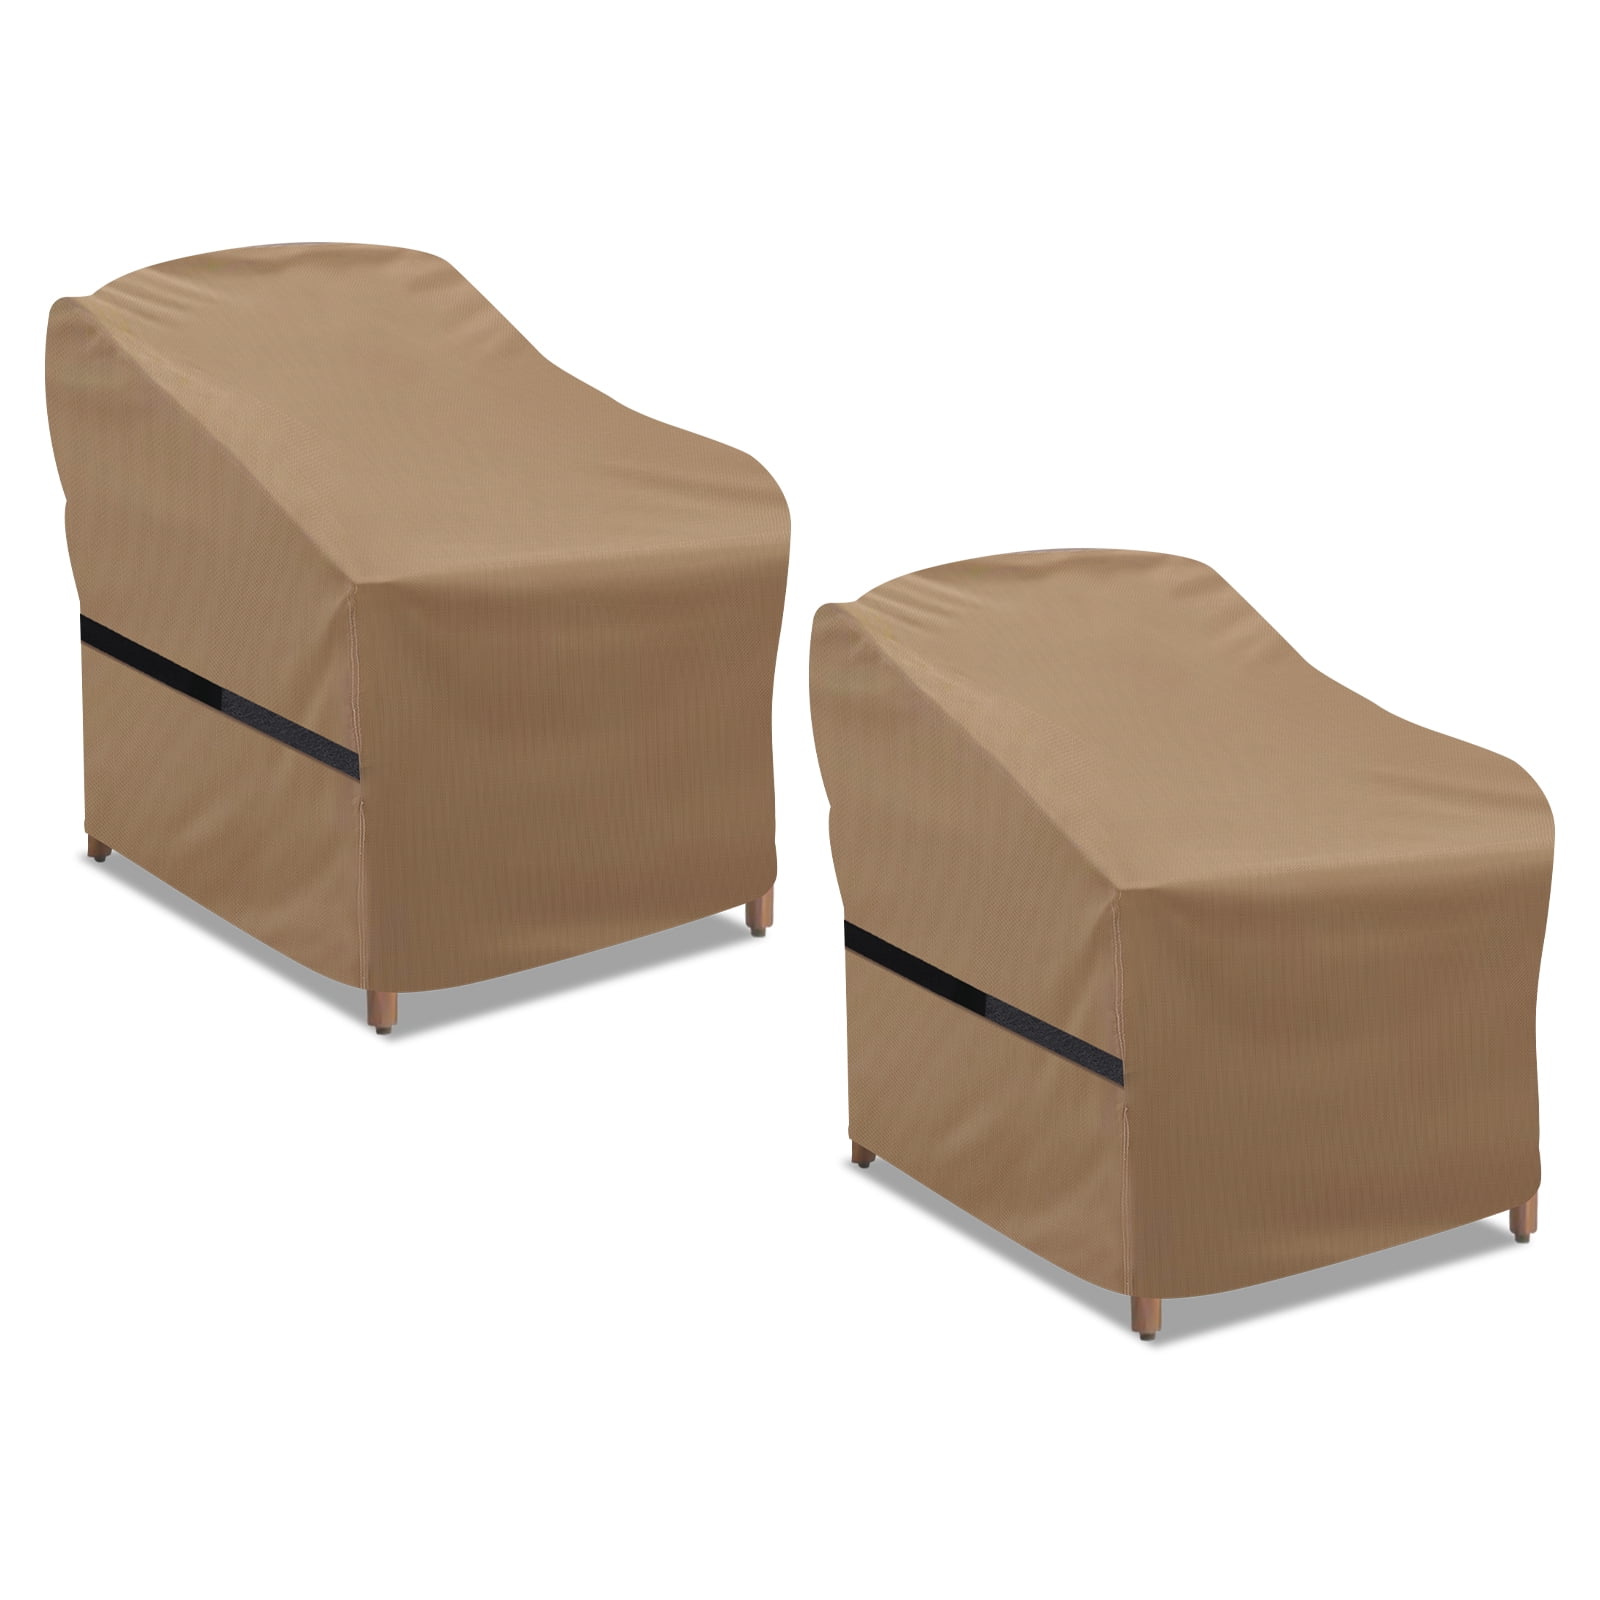 Patio Furniture Chair Covers 36L x 37D x 36H Outdoor Chair Covers Oversize 600D All Weather Proof Furniture Cover 